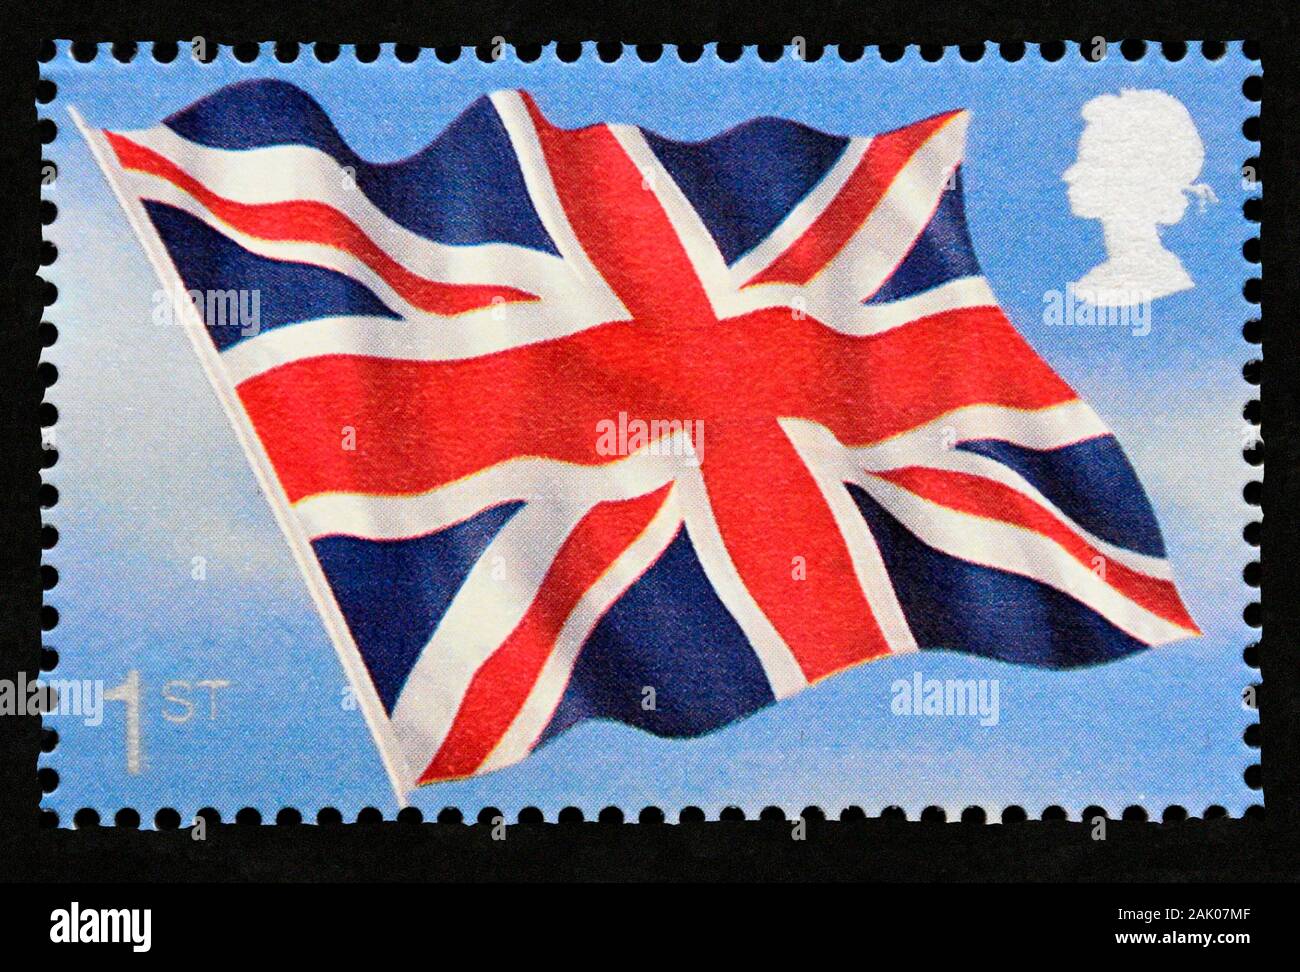 Postage stamp. Great Britain. Queen Elizabeth II. Centenary of Royal Navy Submarine Service. Union Jack Flag. 1st. class. 2001. Stock Photo